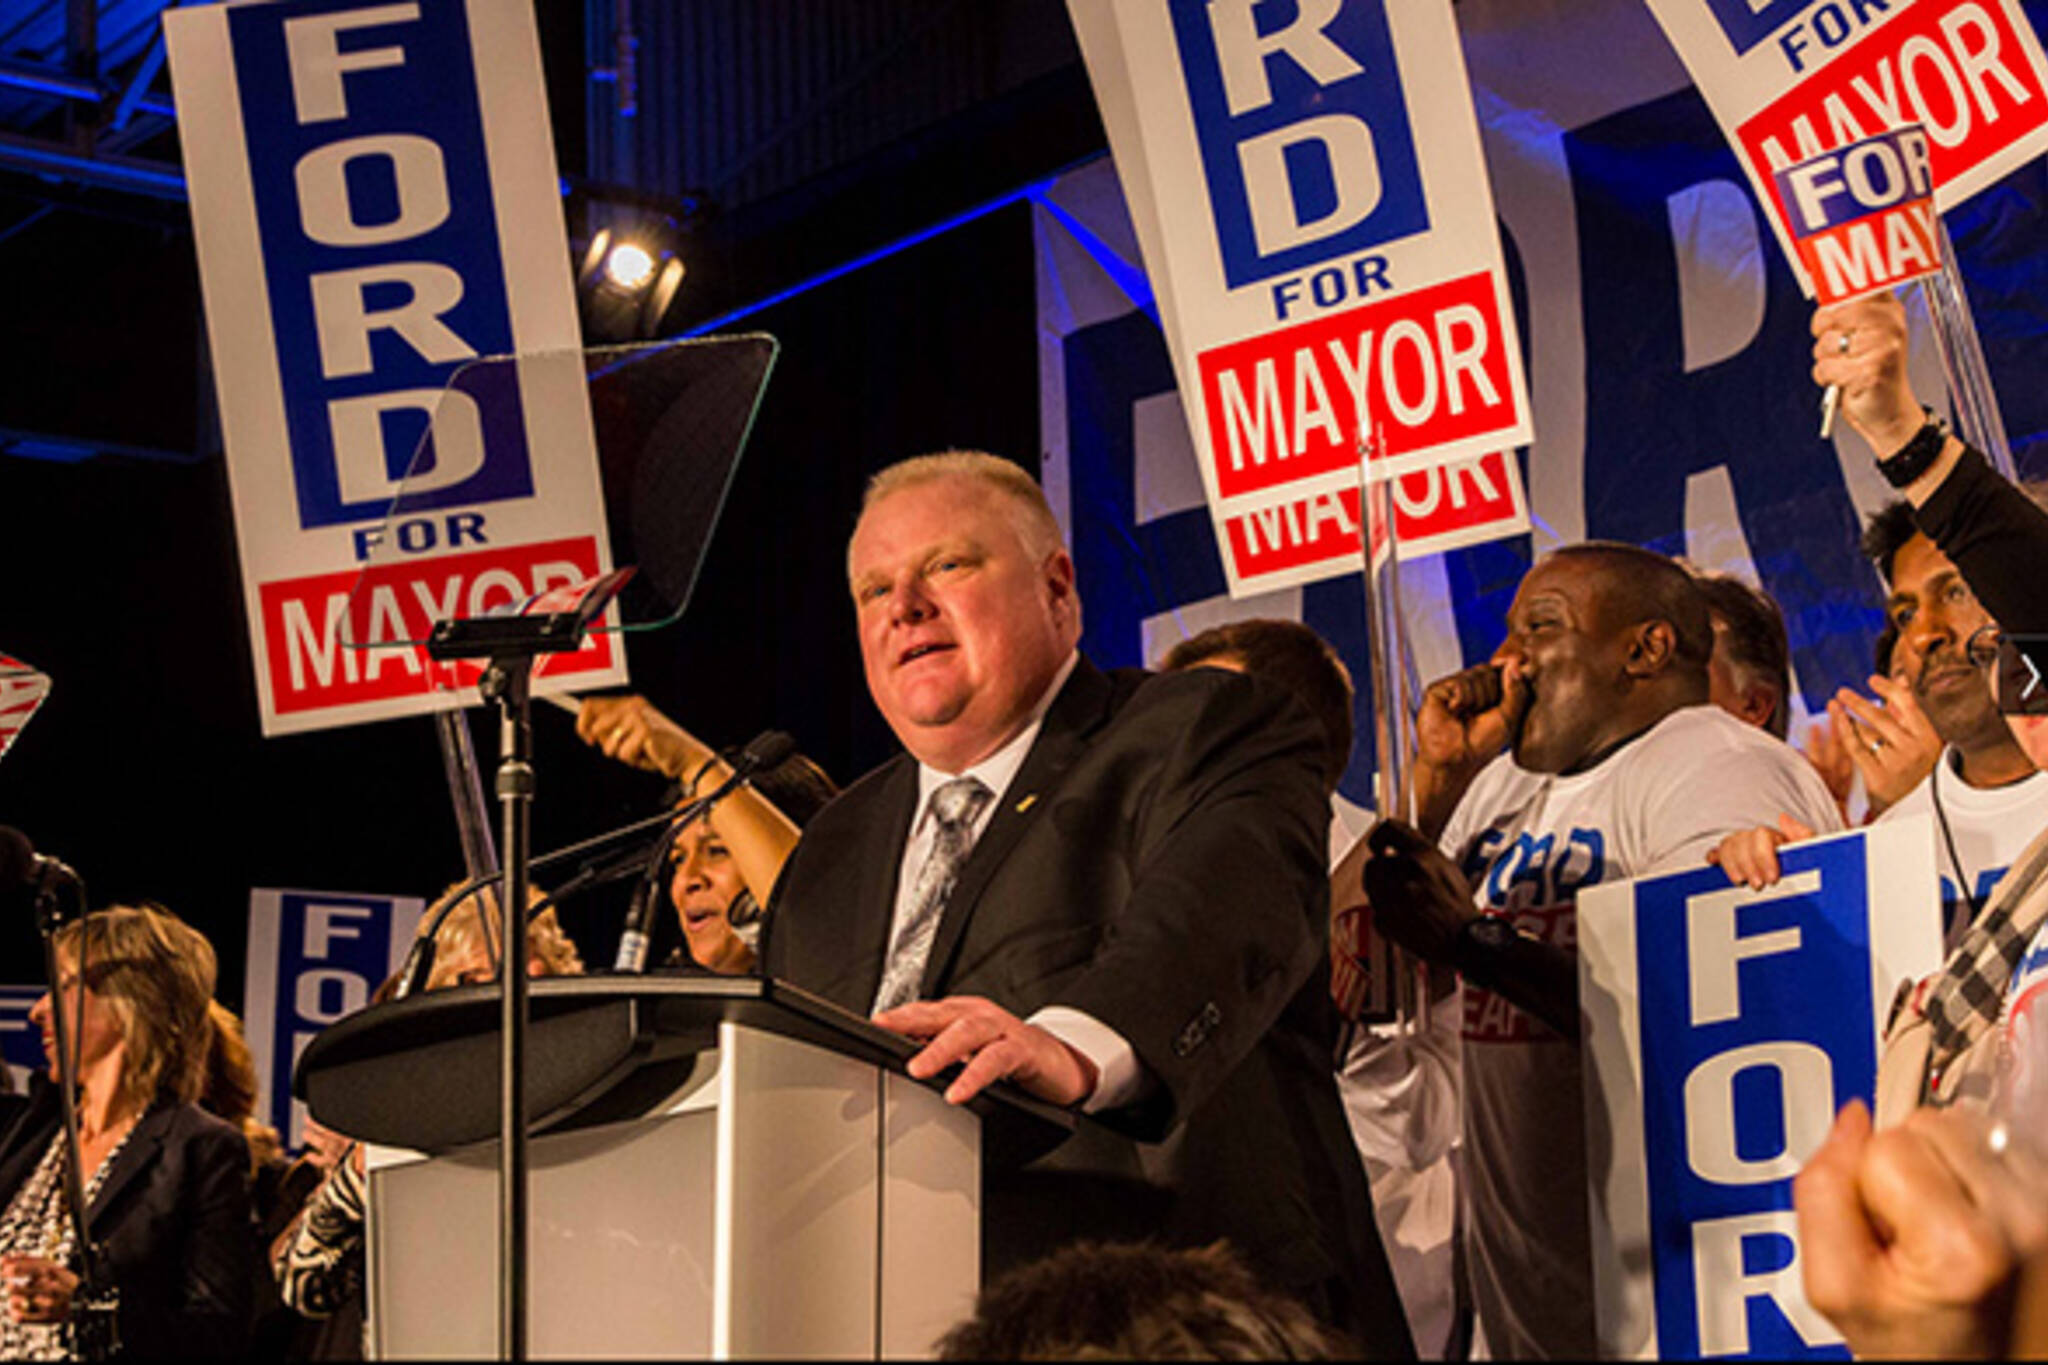 rob ford approval rating